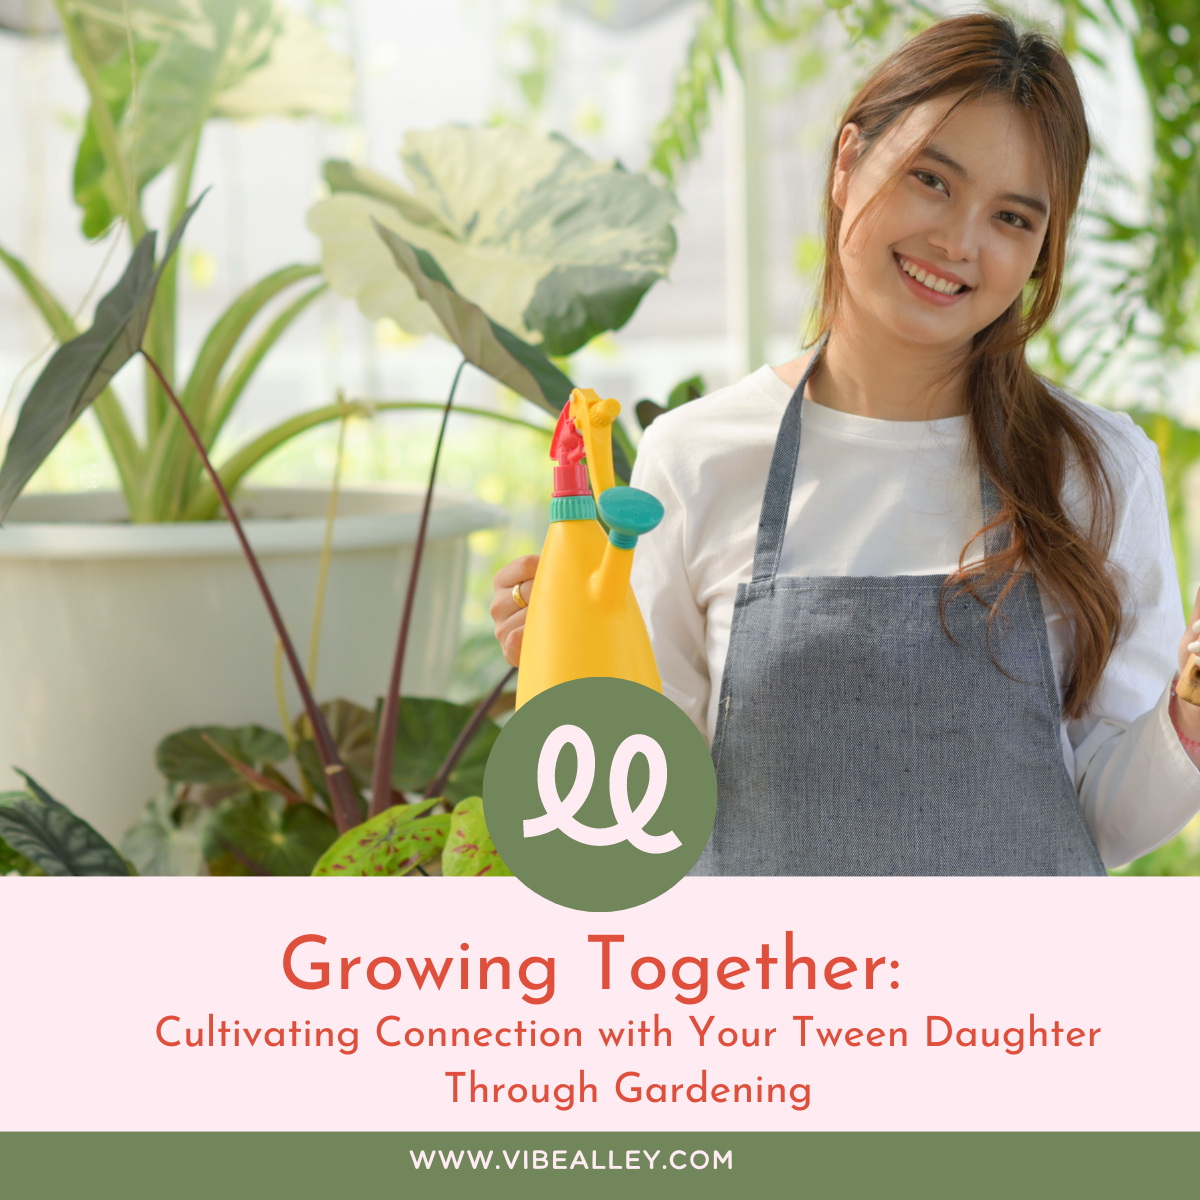 Growing Together: Cultivating Connection with Your Tween Daughter Through Gardening